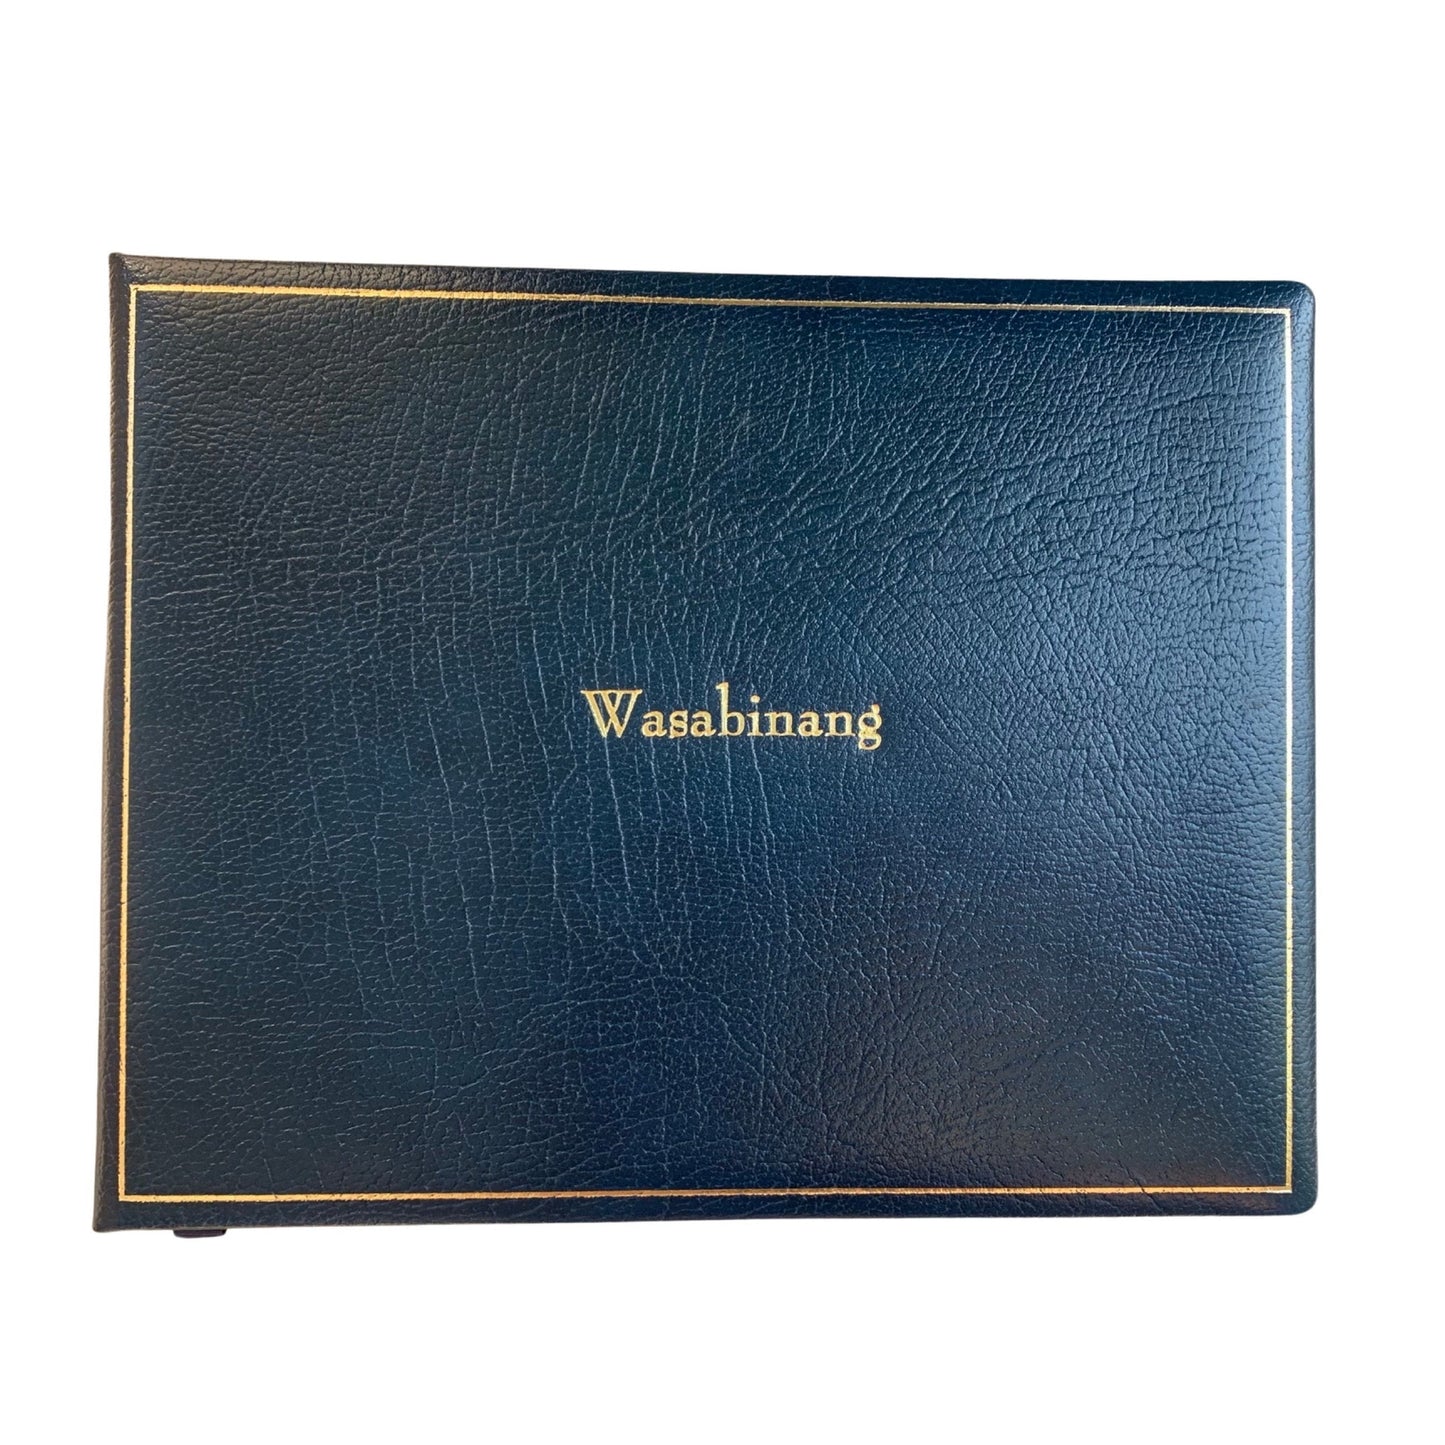 Guest Book Register | 7 by 9 Inches | Name, Date, Address | Made in England | Charing Cross